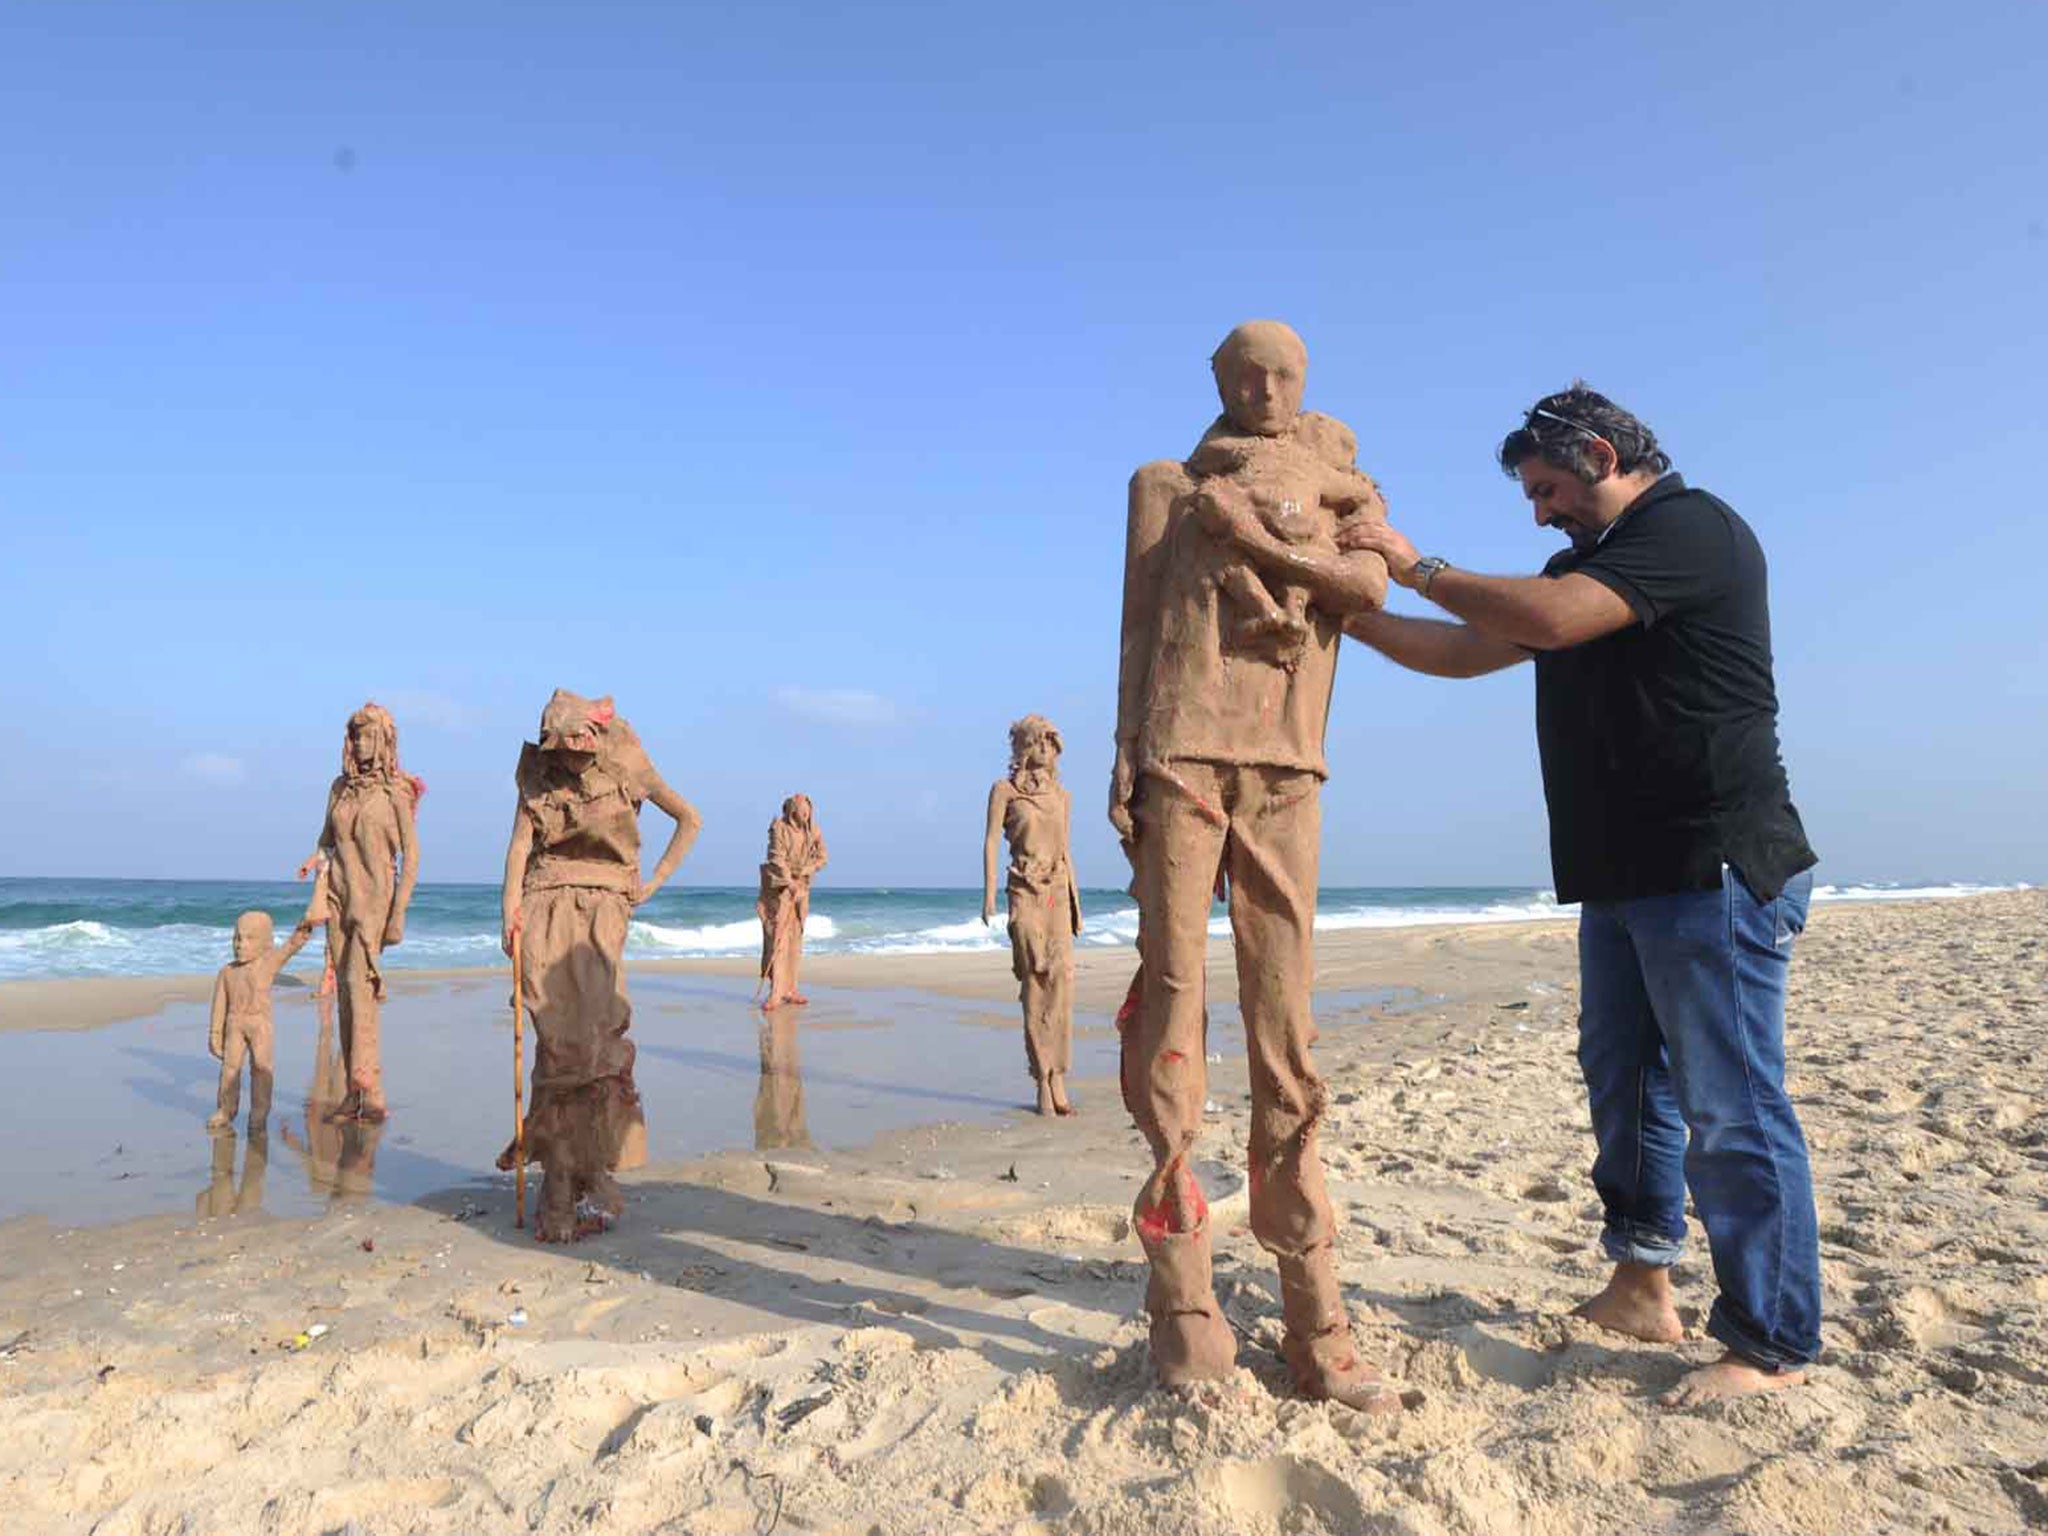 Iyad Sabbah working on his 'Worn Out' installation in Gaza